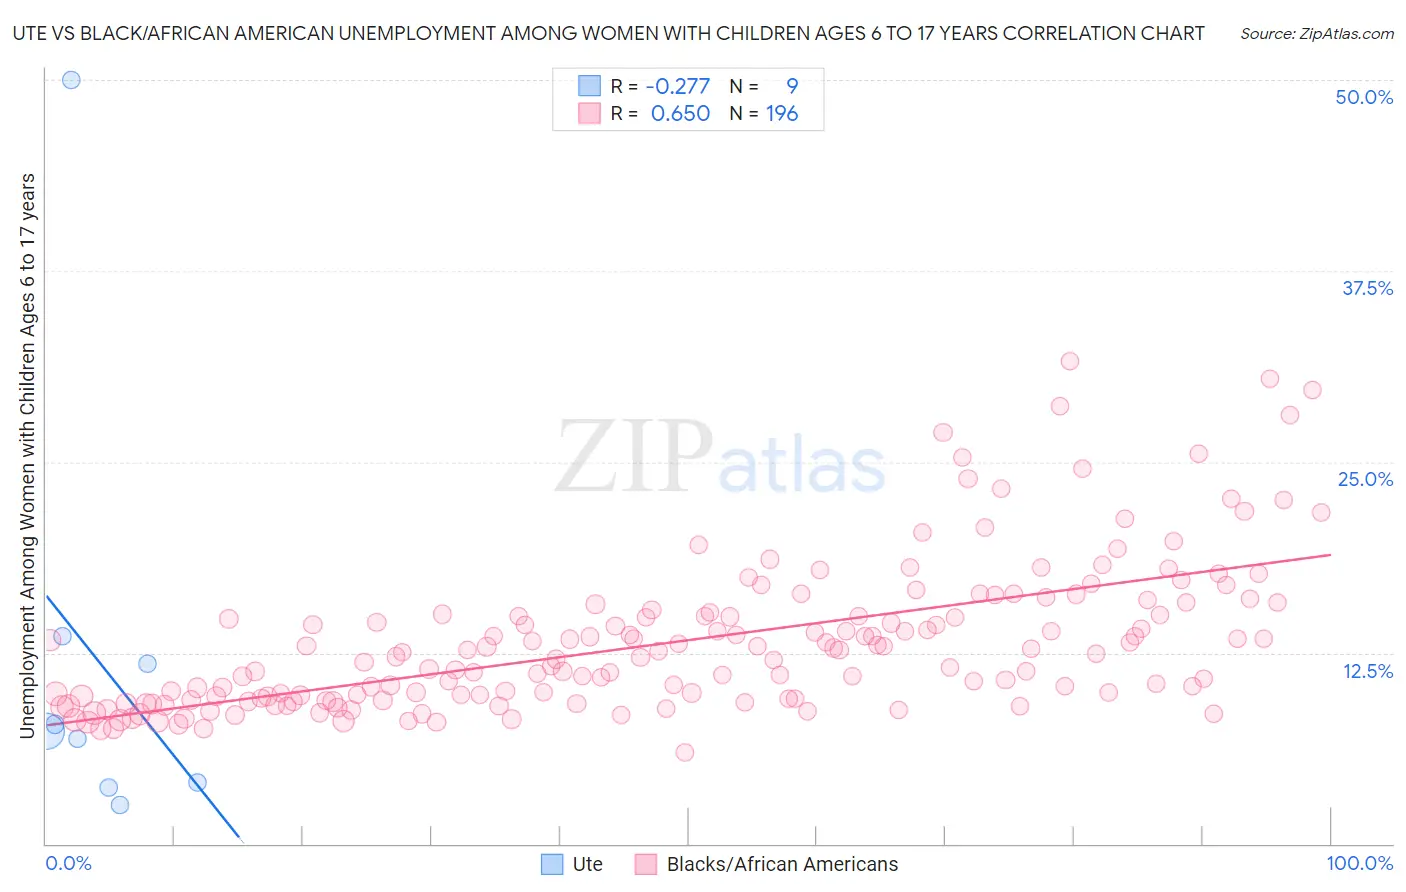 Ute vs Black/African American Unemployment Among Women with Children Ages 6 to 17 years